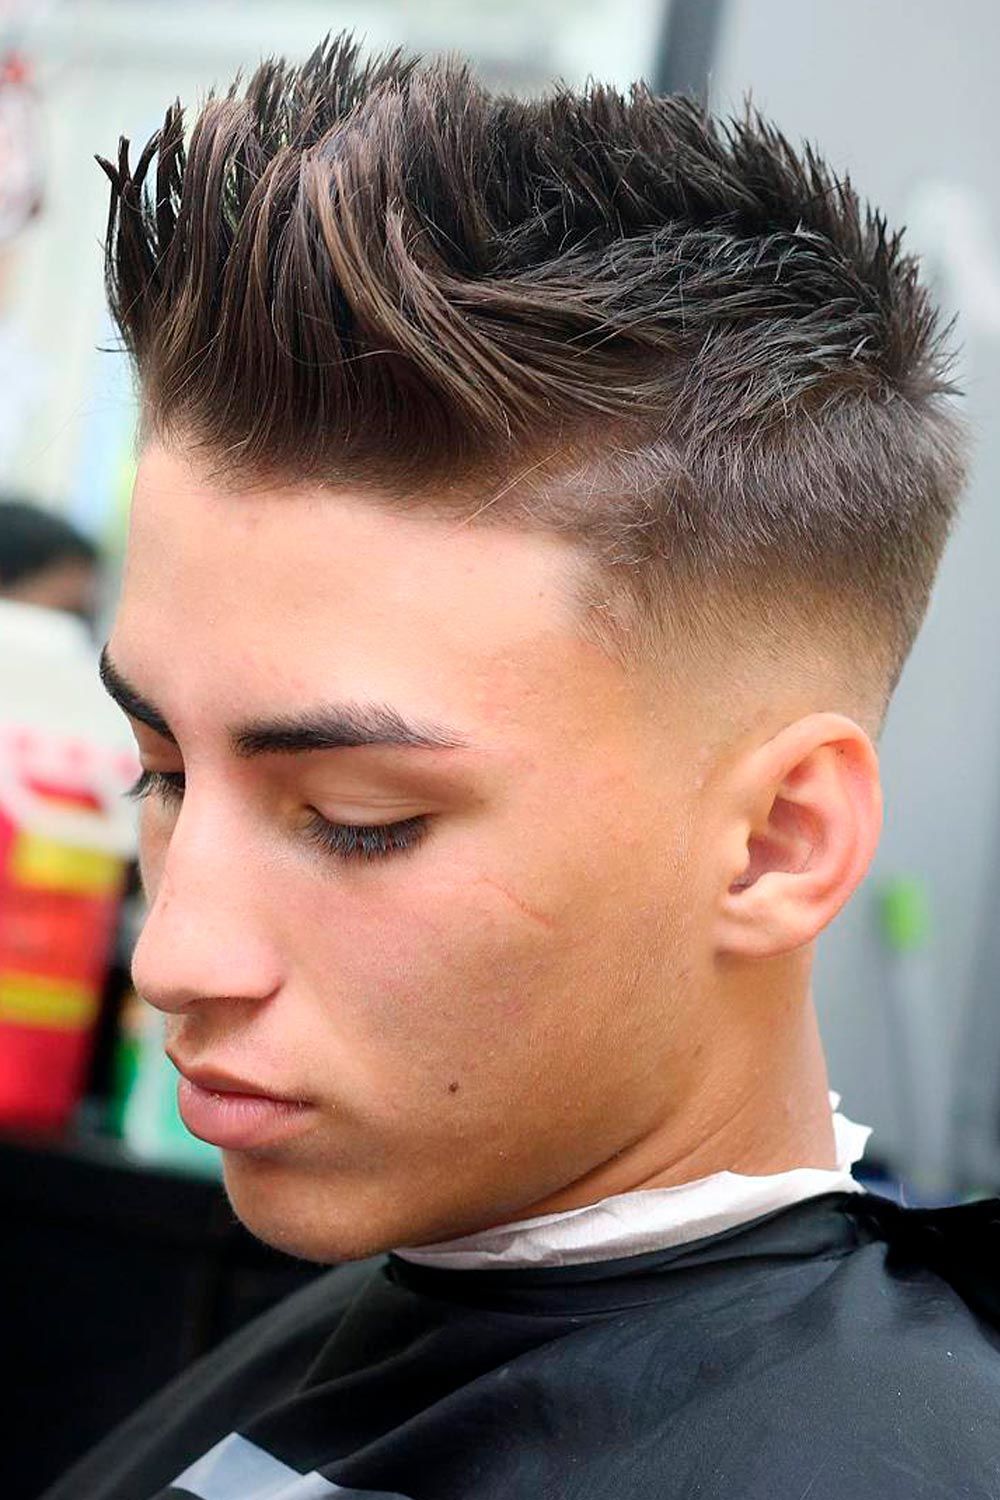 Short Brushed Up Boy Haircuts, hairstyles for boys, boys hair cuts, boy haircut, boy hair cuts, boy hair